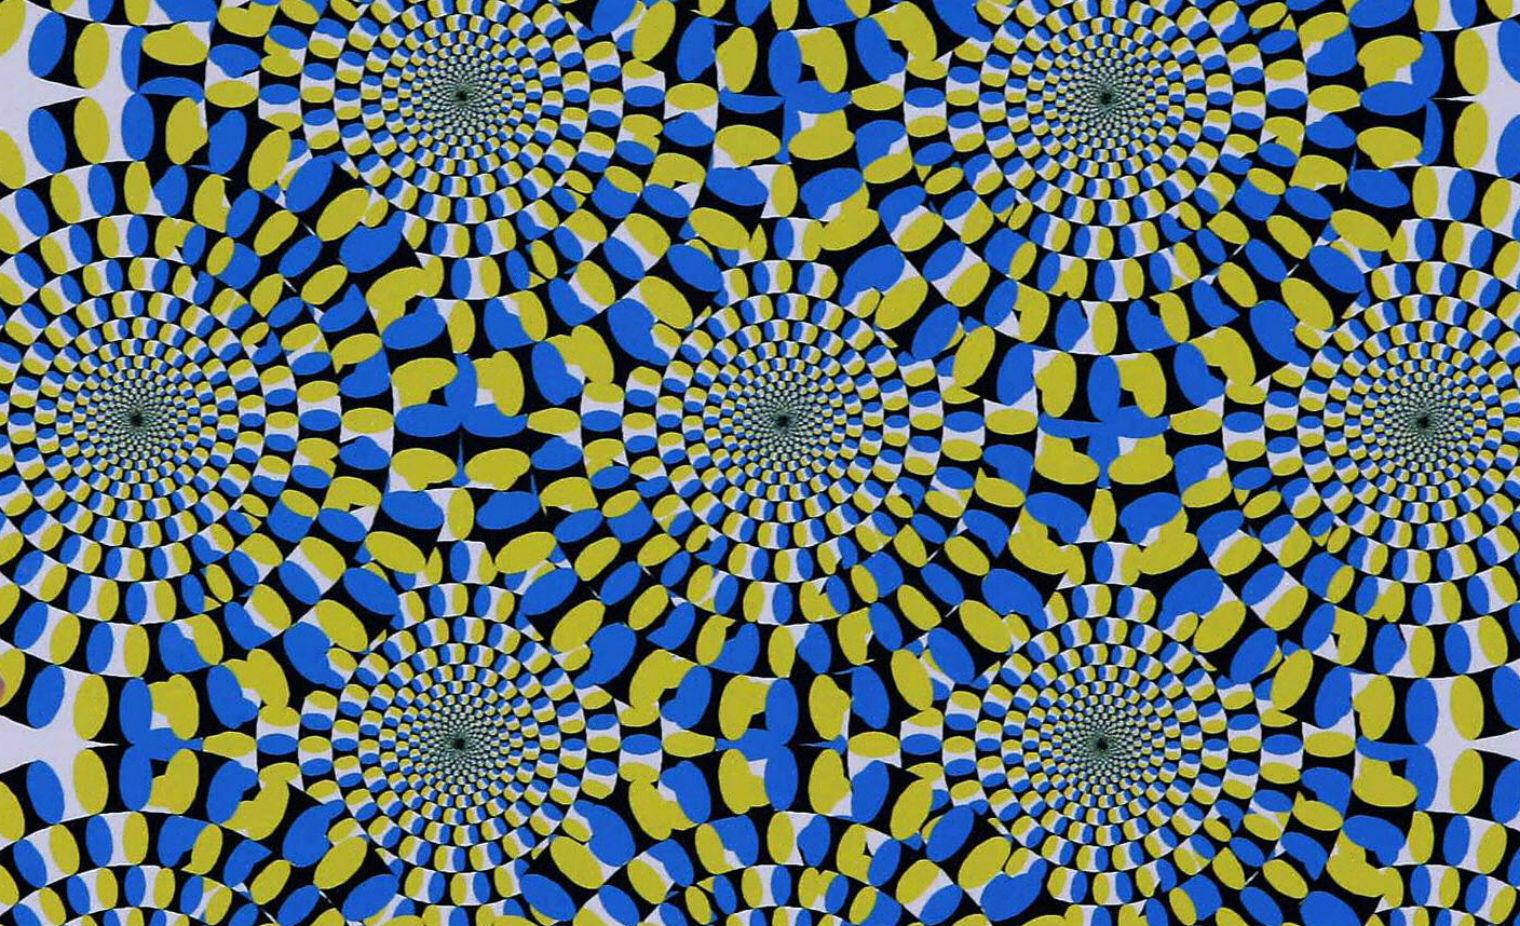 Seven still images that look like they're moving and how